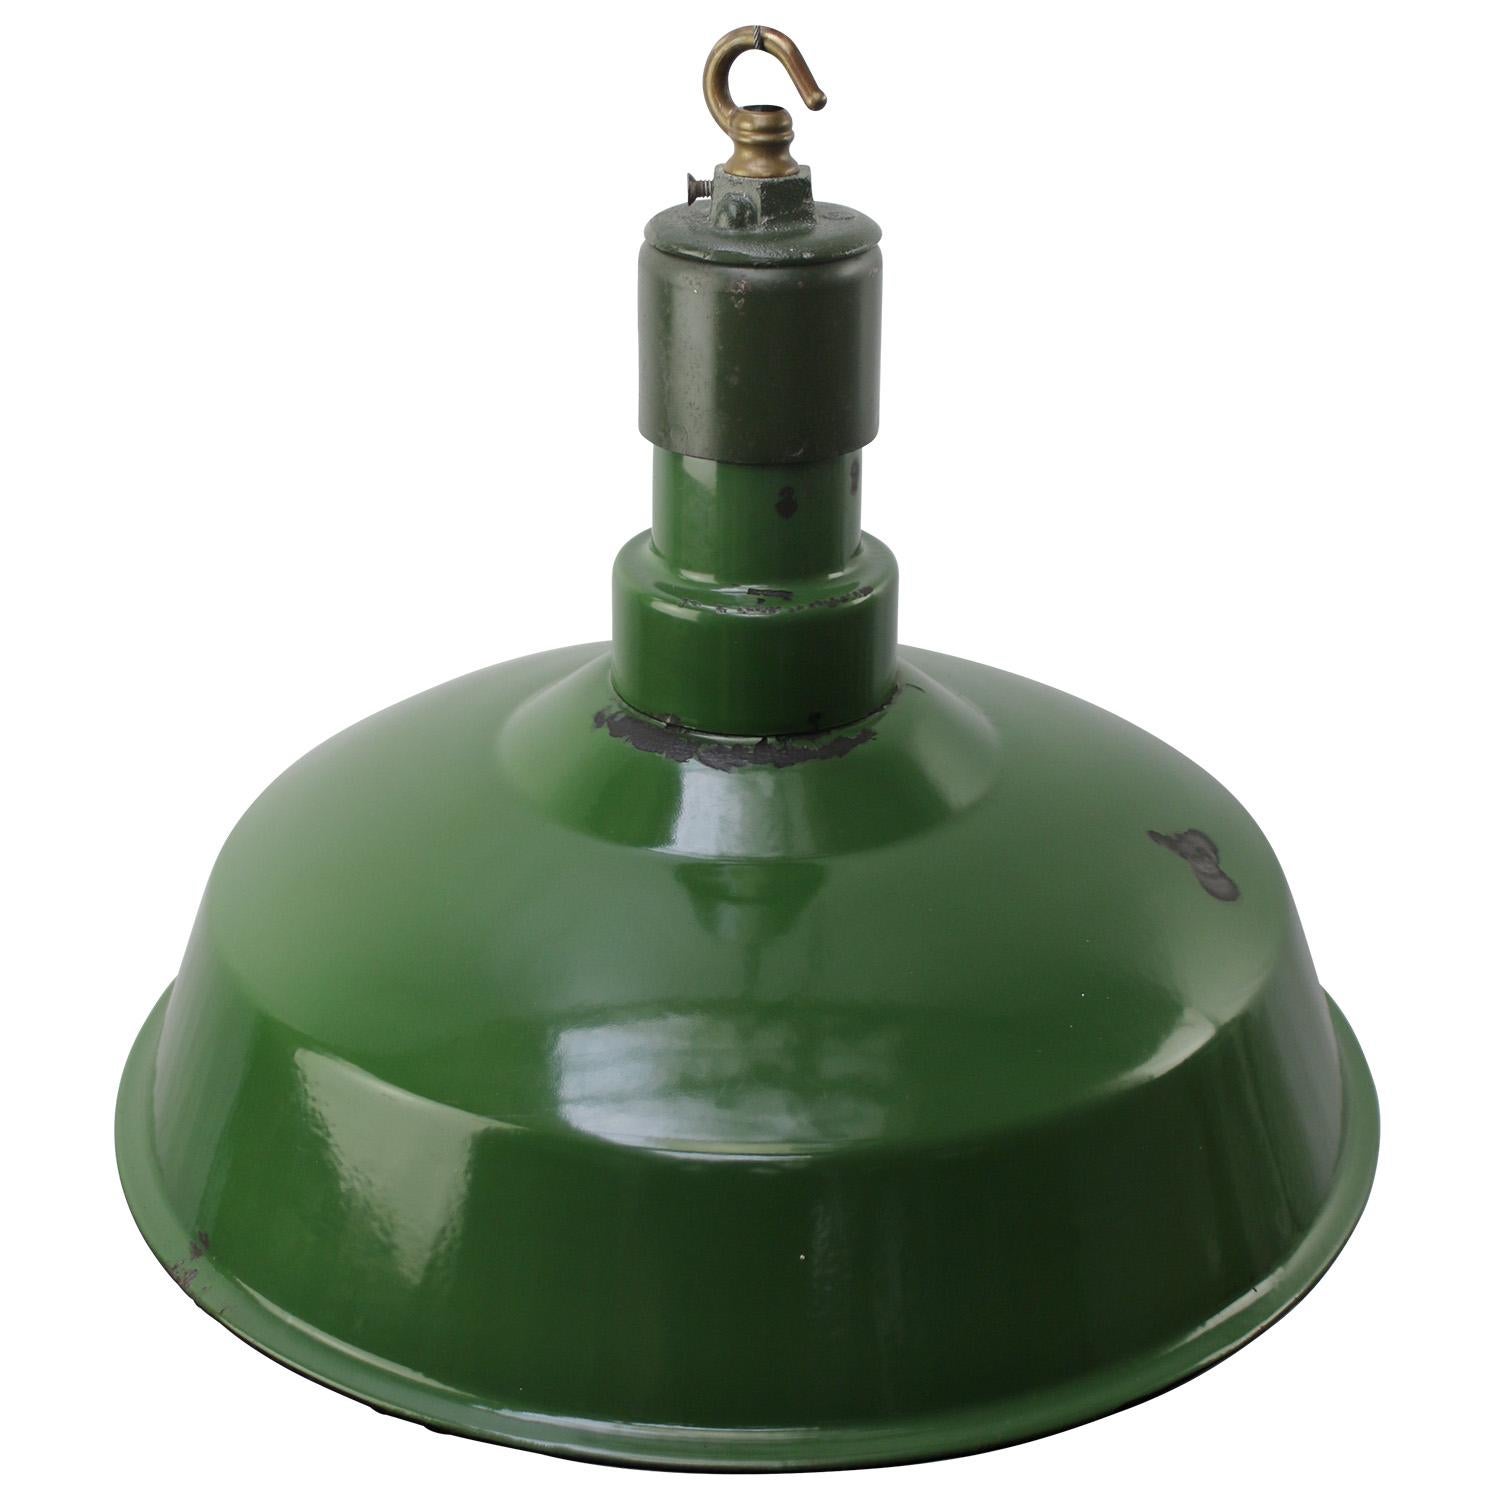 American vintage industrial hanging pendant.
Green enamel with white interior. Metal top.

Weight: 2.20 kg / 4.9 lb

Priced per individual item. All lamps have been made suitable by international standards for incandescent light bulbs,